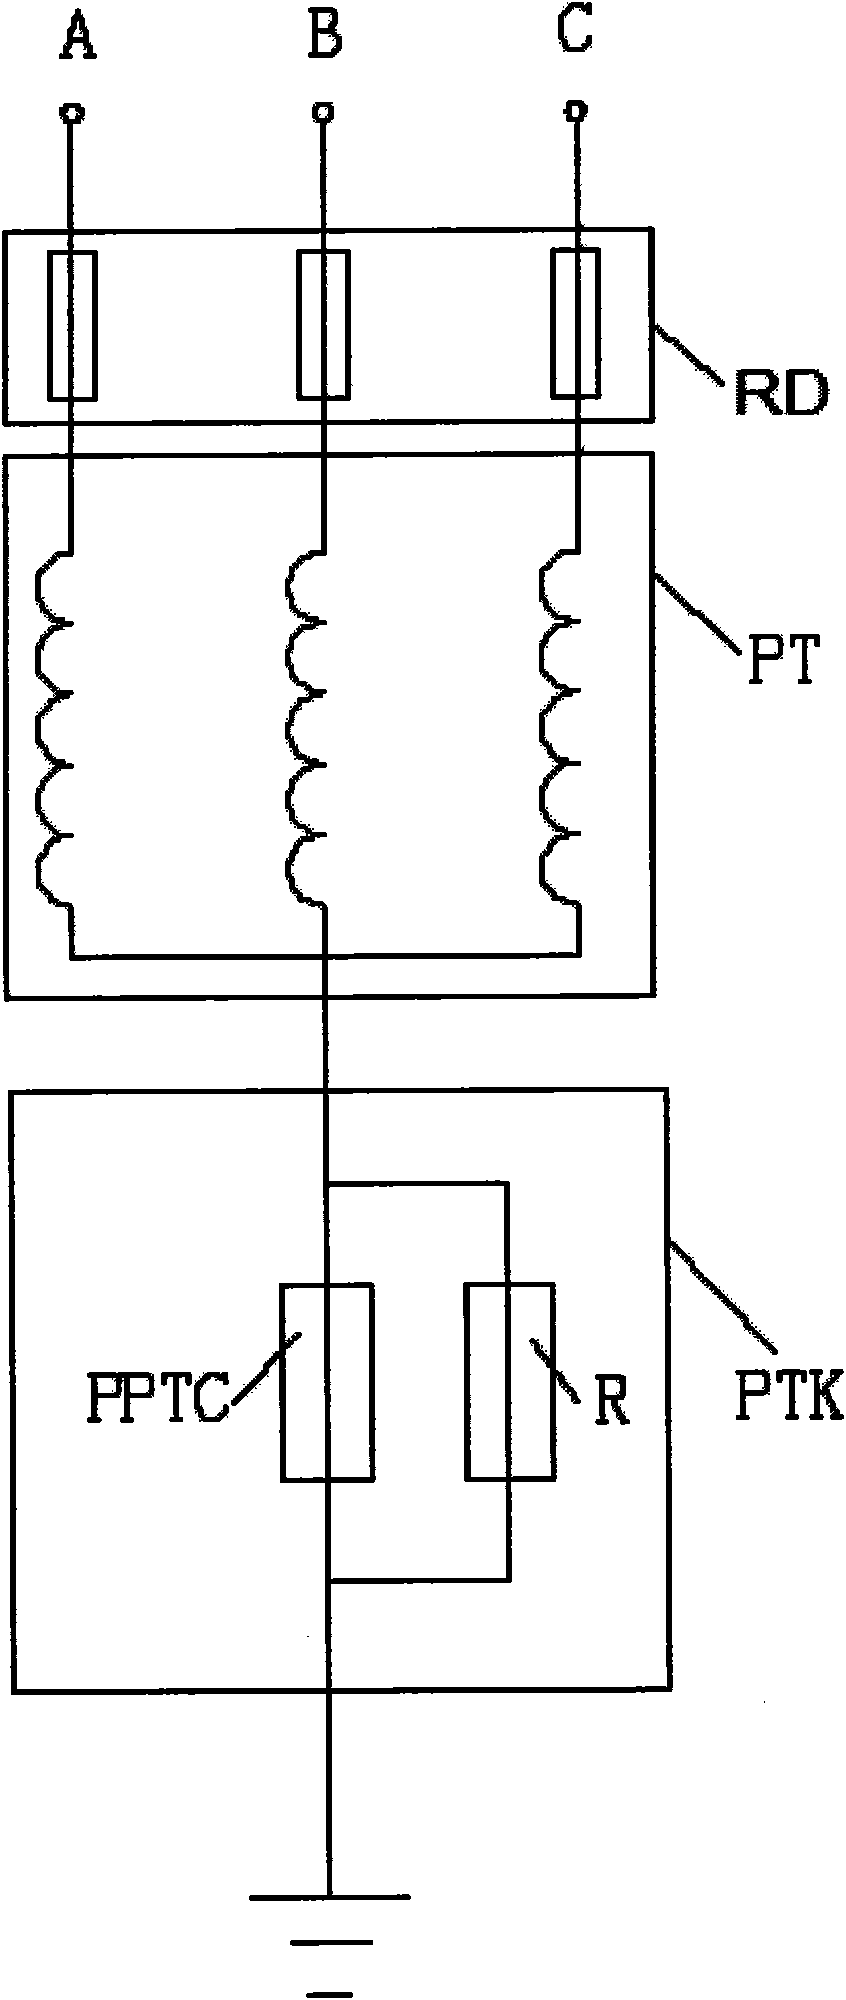 Harmonic elimination protector for electromagnetic potential transformer (PT) of three-phase electric network